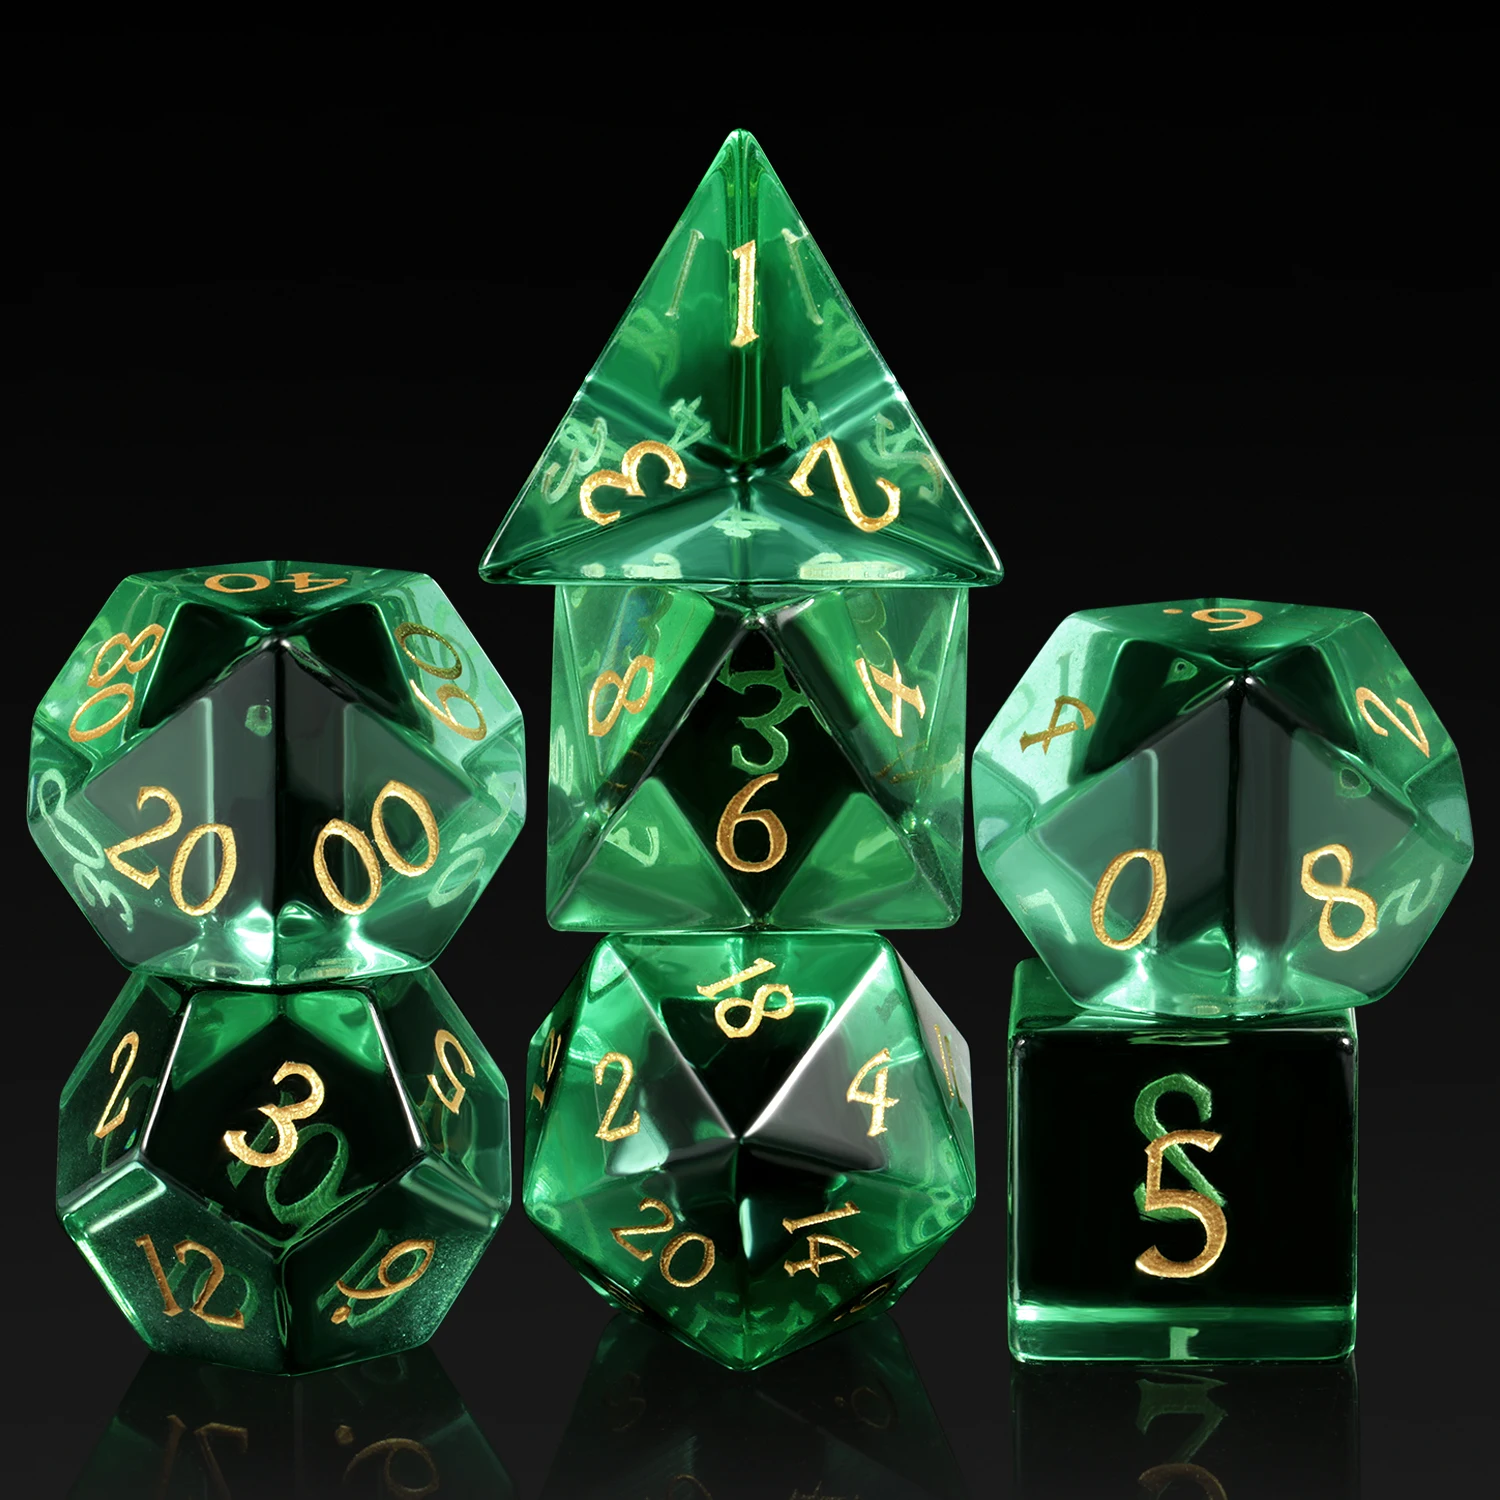 

Gemstone Dice d&d Engraved DND Glass Dice Green Handmade Stone Polyhedral Dice Set D4 D6 D8 D10 D12 D20 D% for MTG Table Games